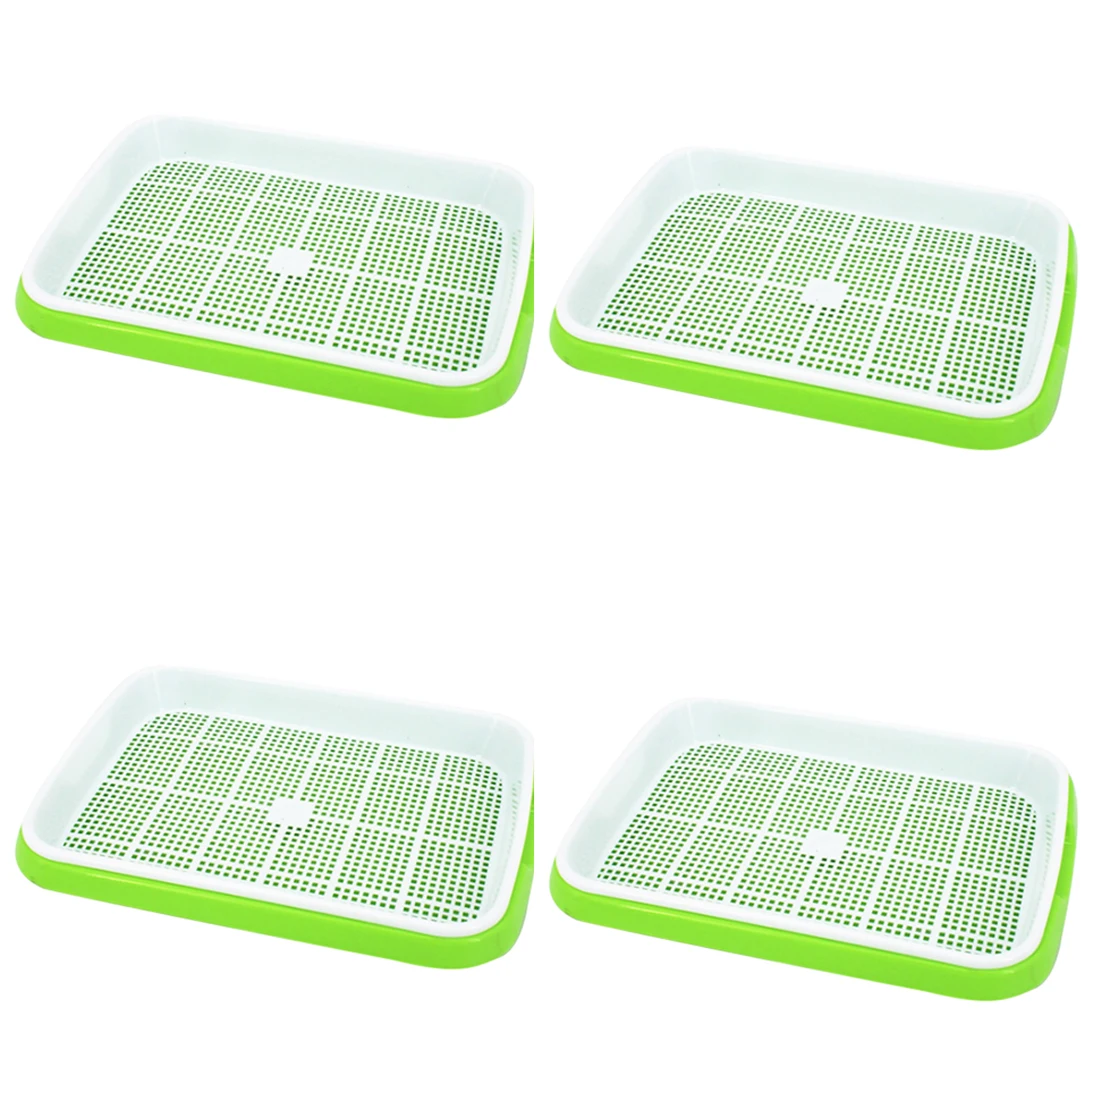 White TOBY 5Pcs Double-layer Seed Sprouter Tray Seeding Germination Tray Hydroponics Basket Green